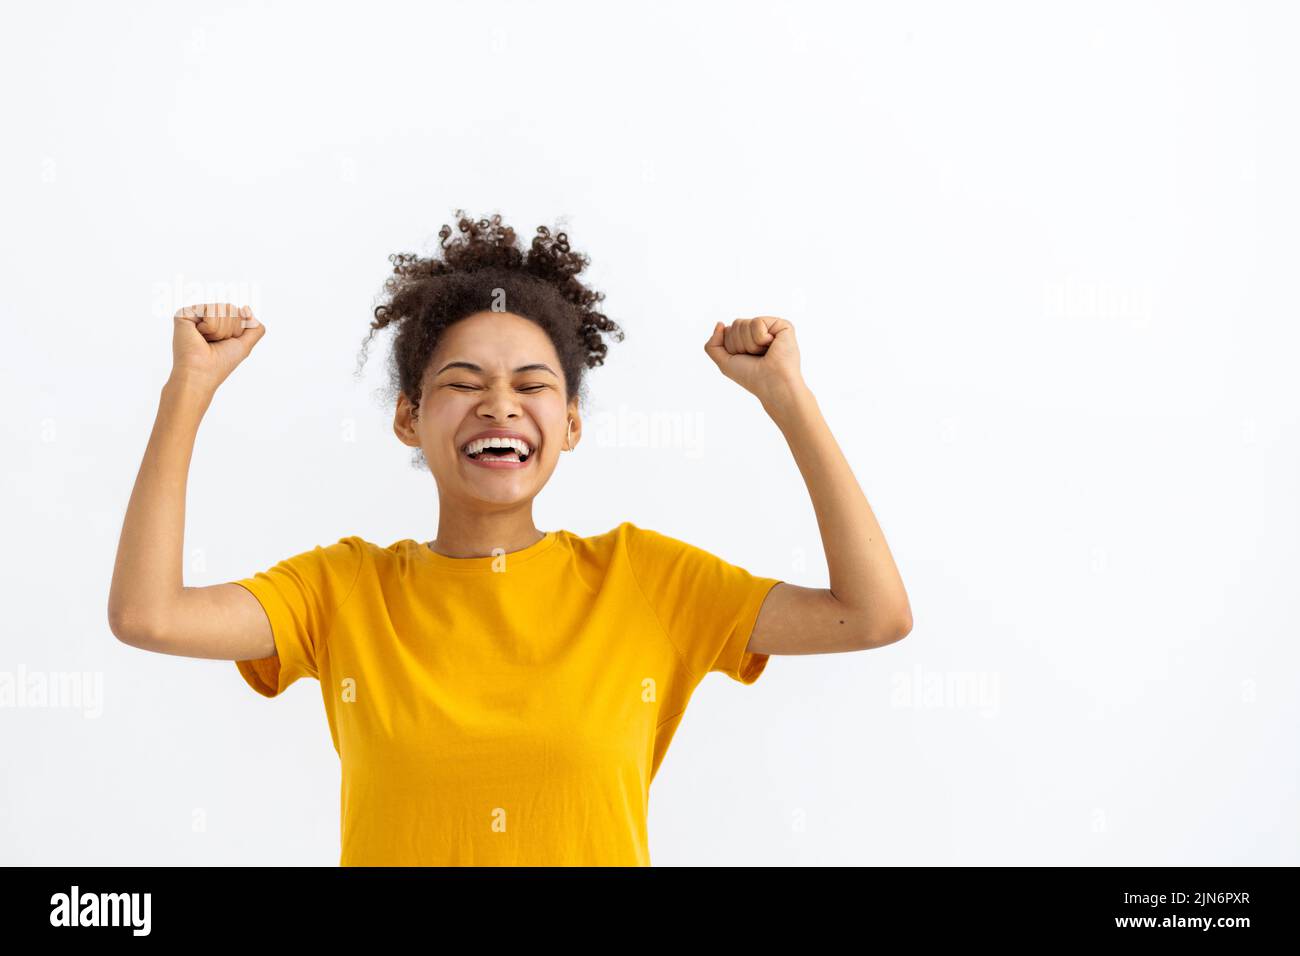 funny young African American woman celebrating victory on a white background Stock Photo